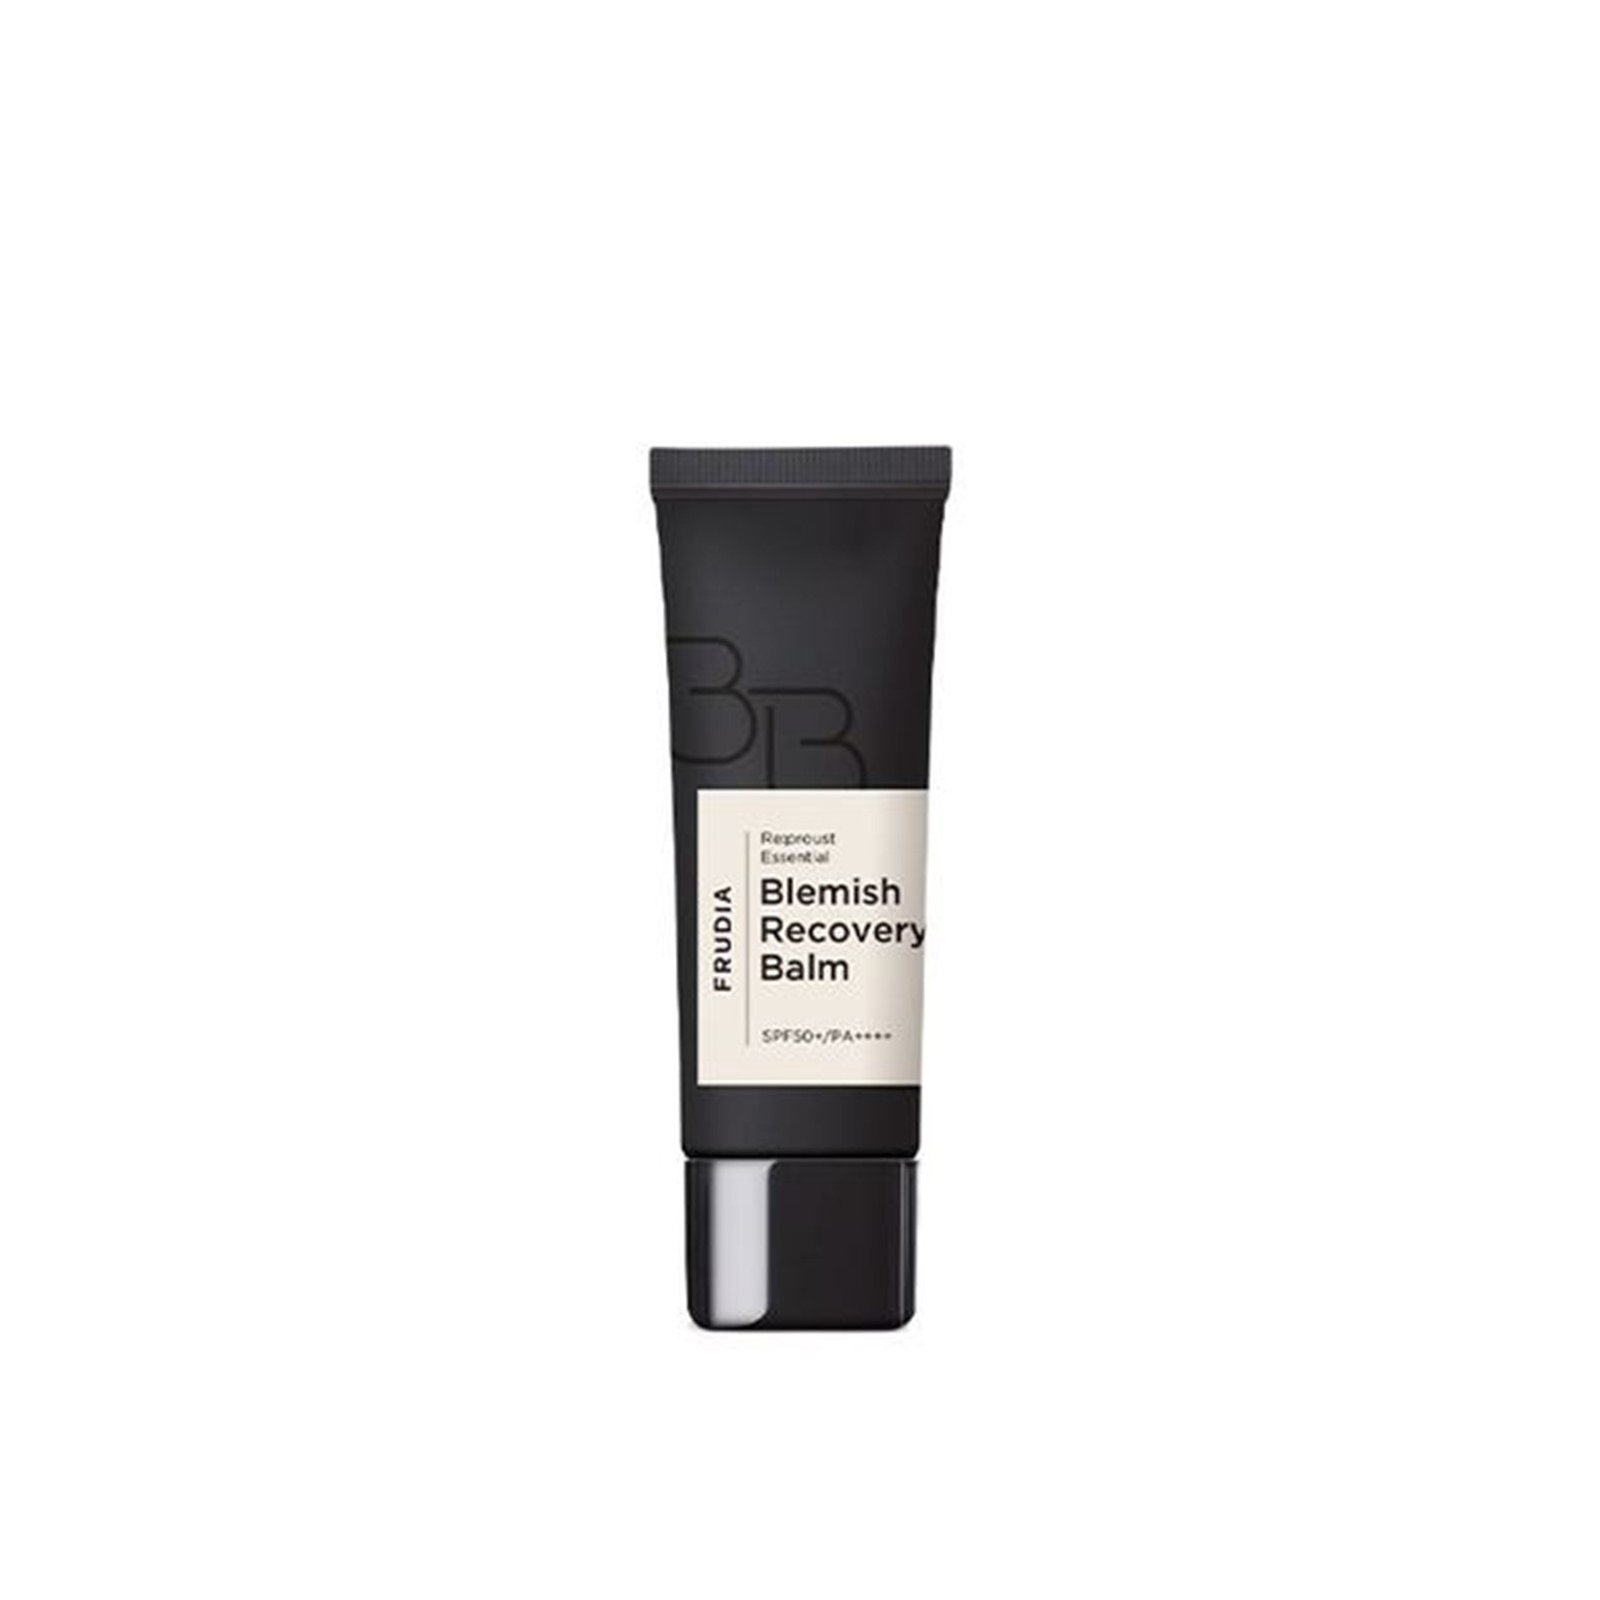 Frudia Re:Proust Essential Blemish Recovery Balm SPF50+ 40g (1.41 oz)